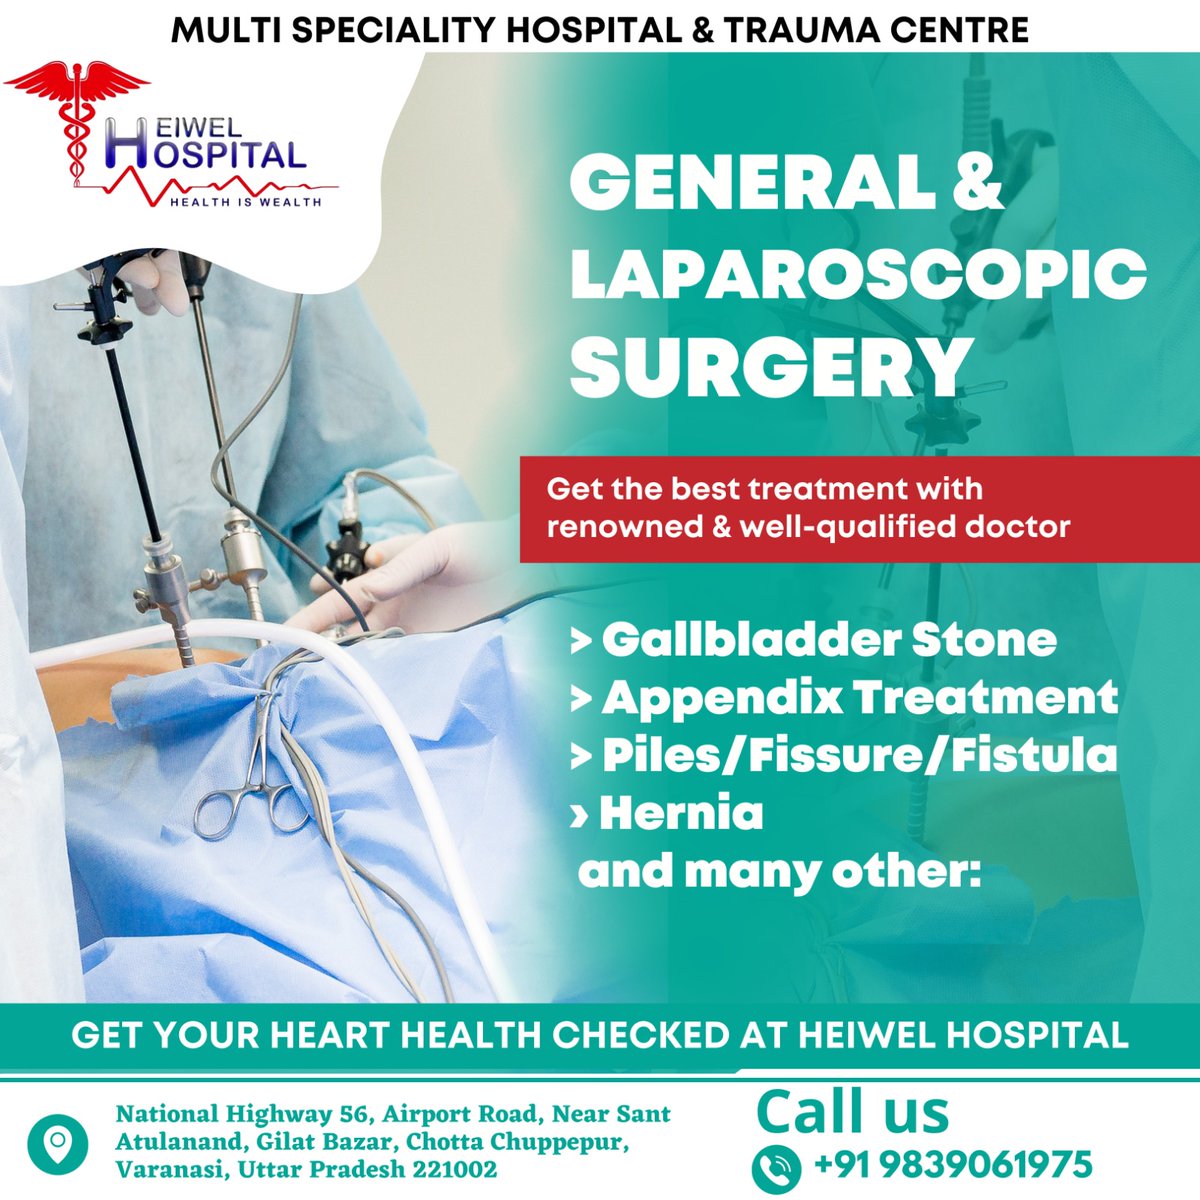 Get the best treatment with best doctors.

#IVF  #laproscopy #GYNAECOLOGIST #infertility #causesofinfertility #treatmentofinfertility #iui #ivf #icsi #maleinfertility #femaleinfertility #bestinfertilityspecialist  #Multispeciality  #24x7  #besthospitalinvaranasi